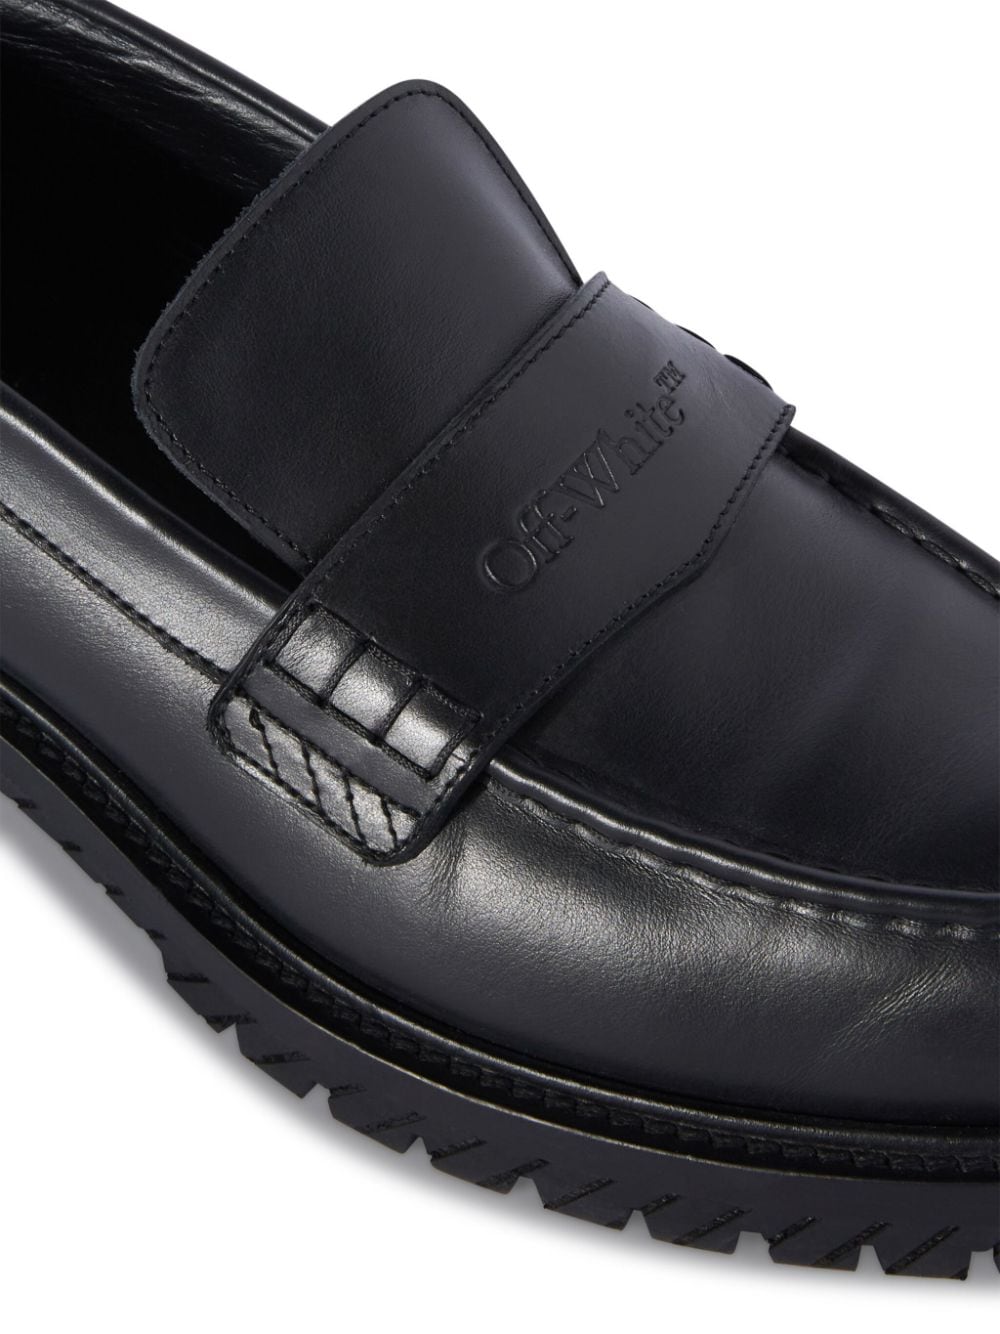 Military logo-debossed leather loafers<BR/><BR/><BR/>